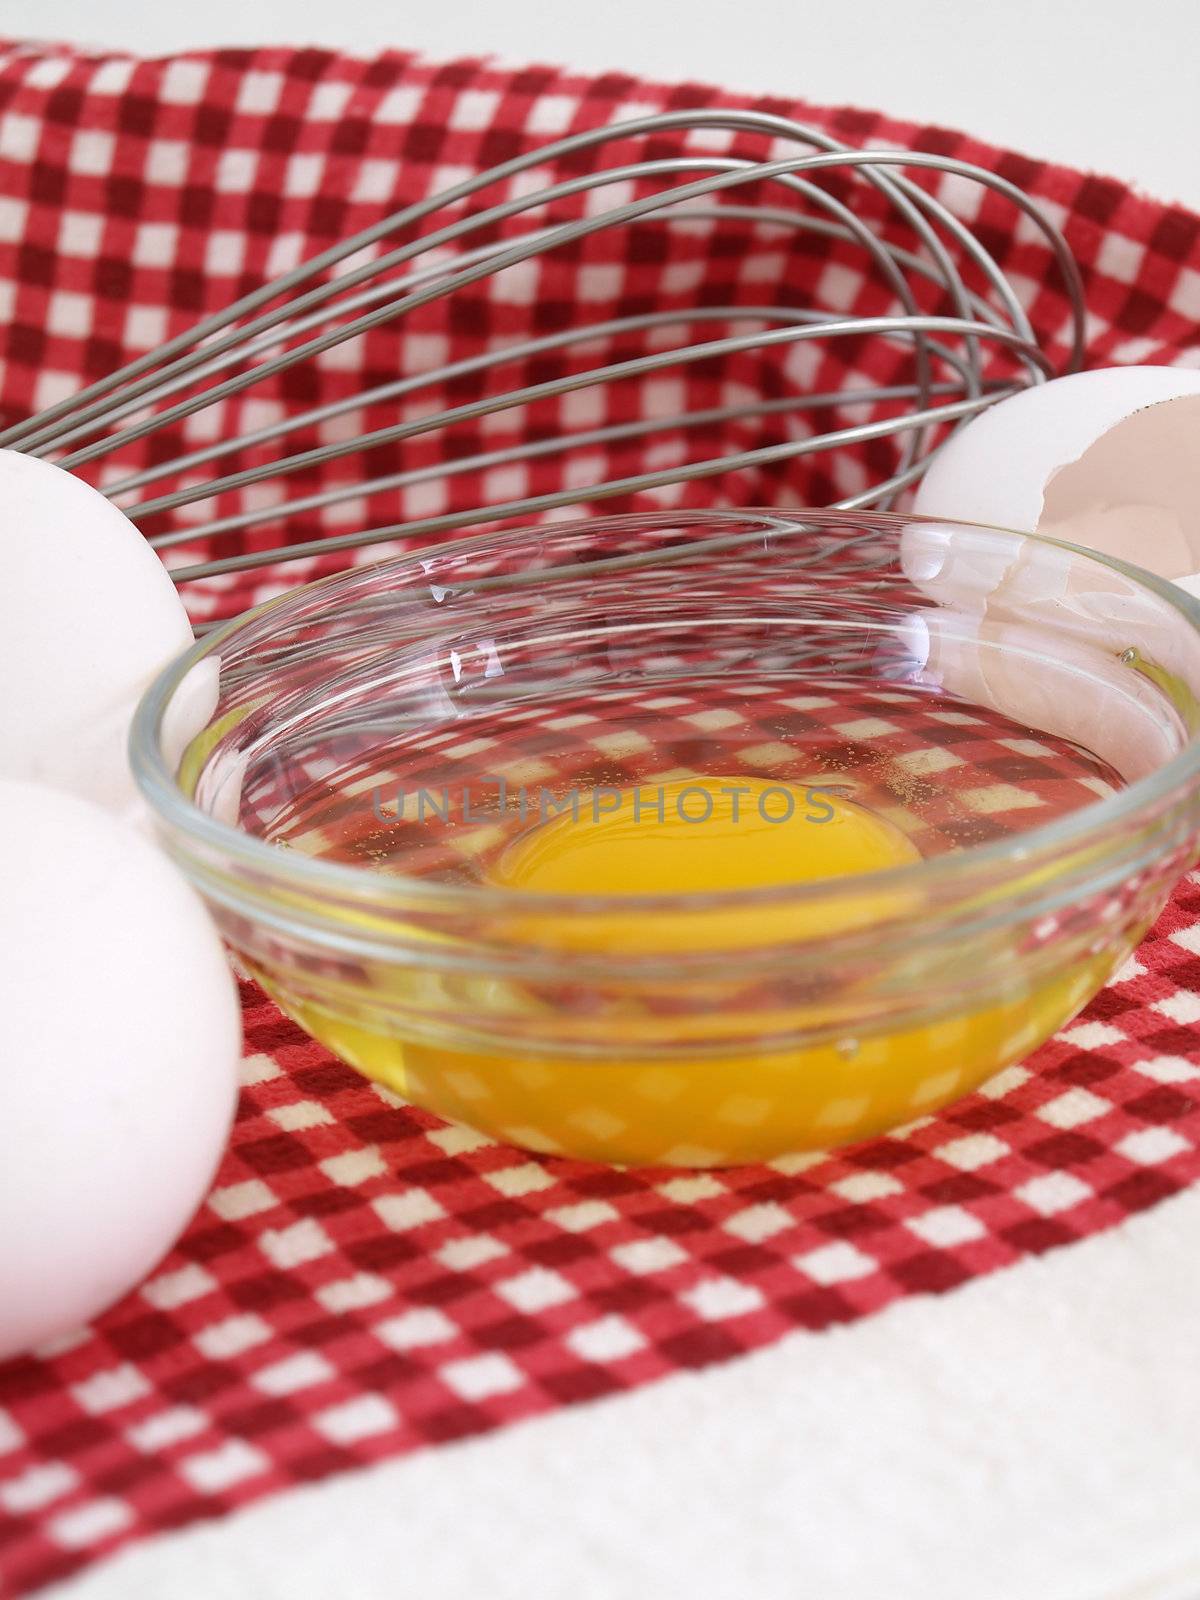 An egg cracked into a dish, eggshells and whole eggs with a whisk laying on a red checkered background.